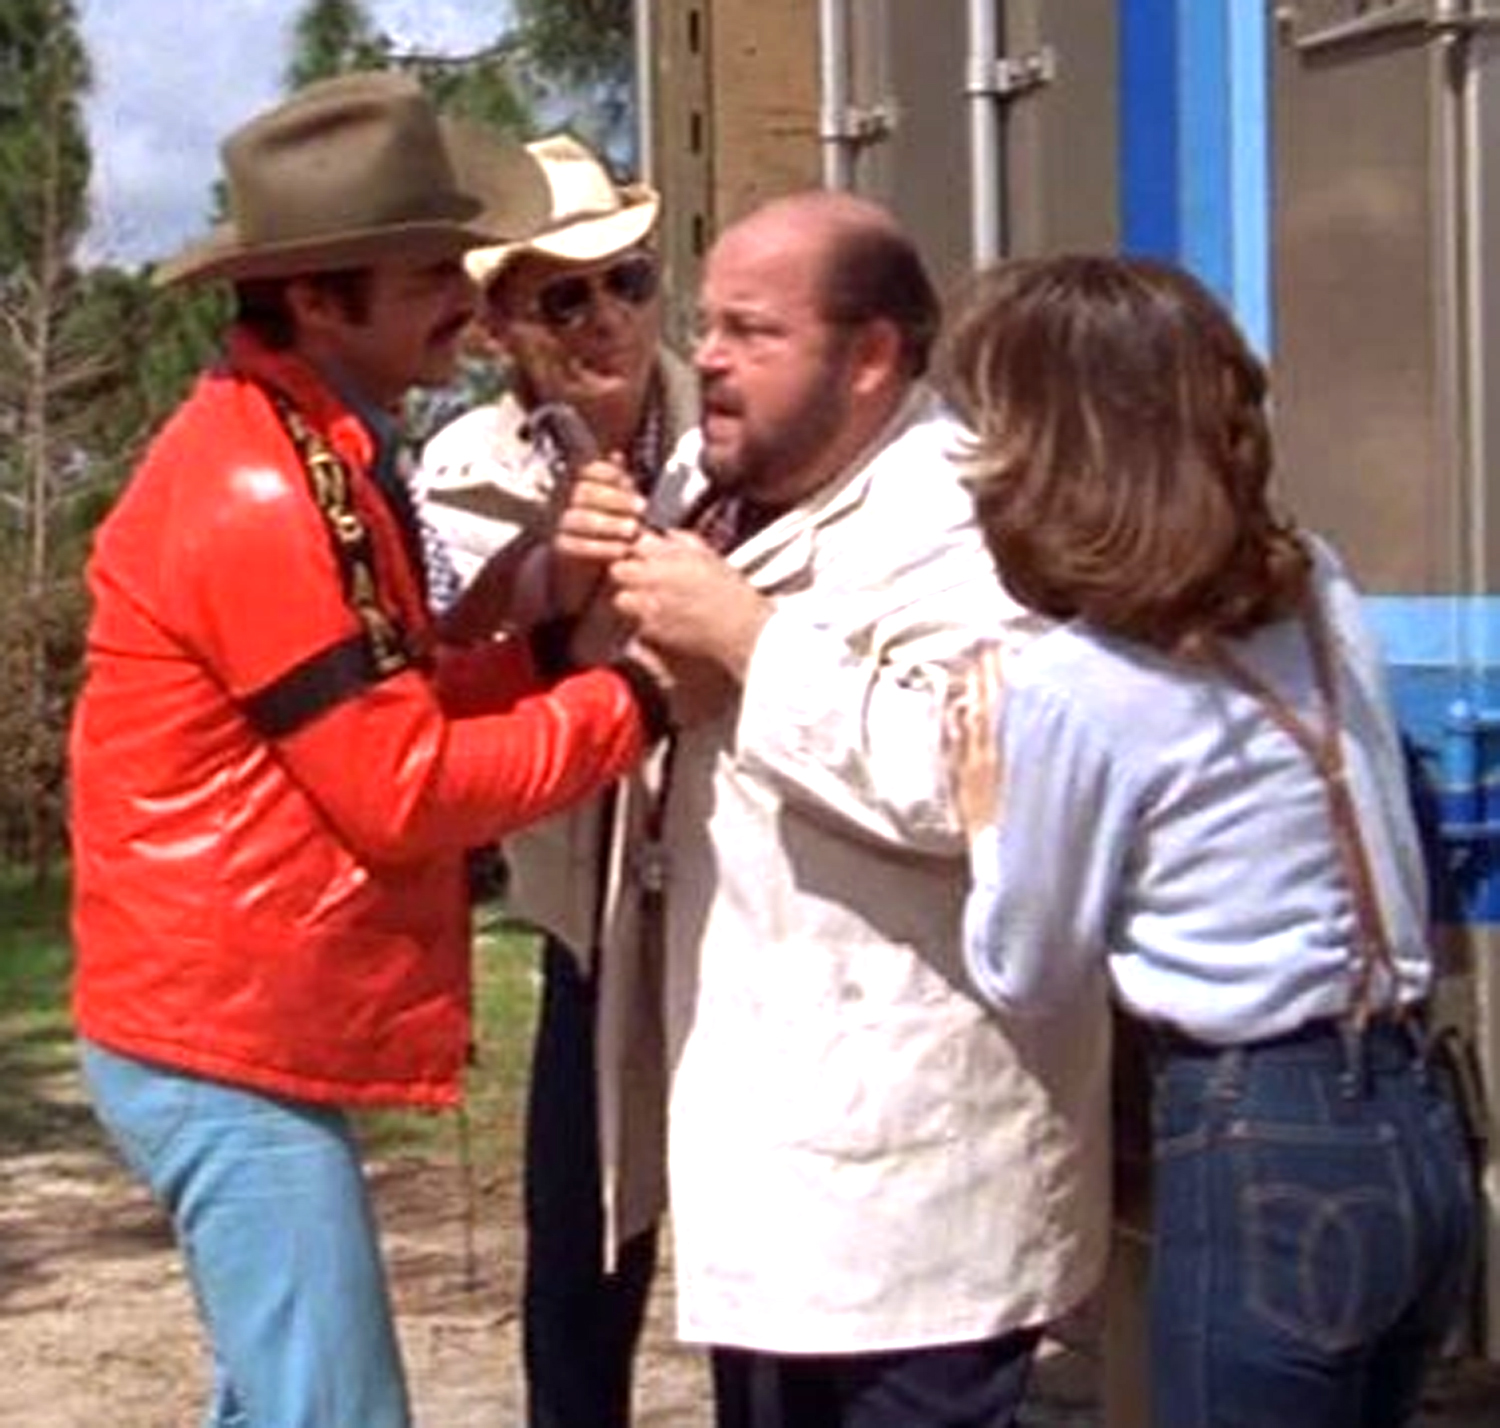 Iconic piece is the Red Smokey and the Bandit jacket